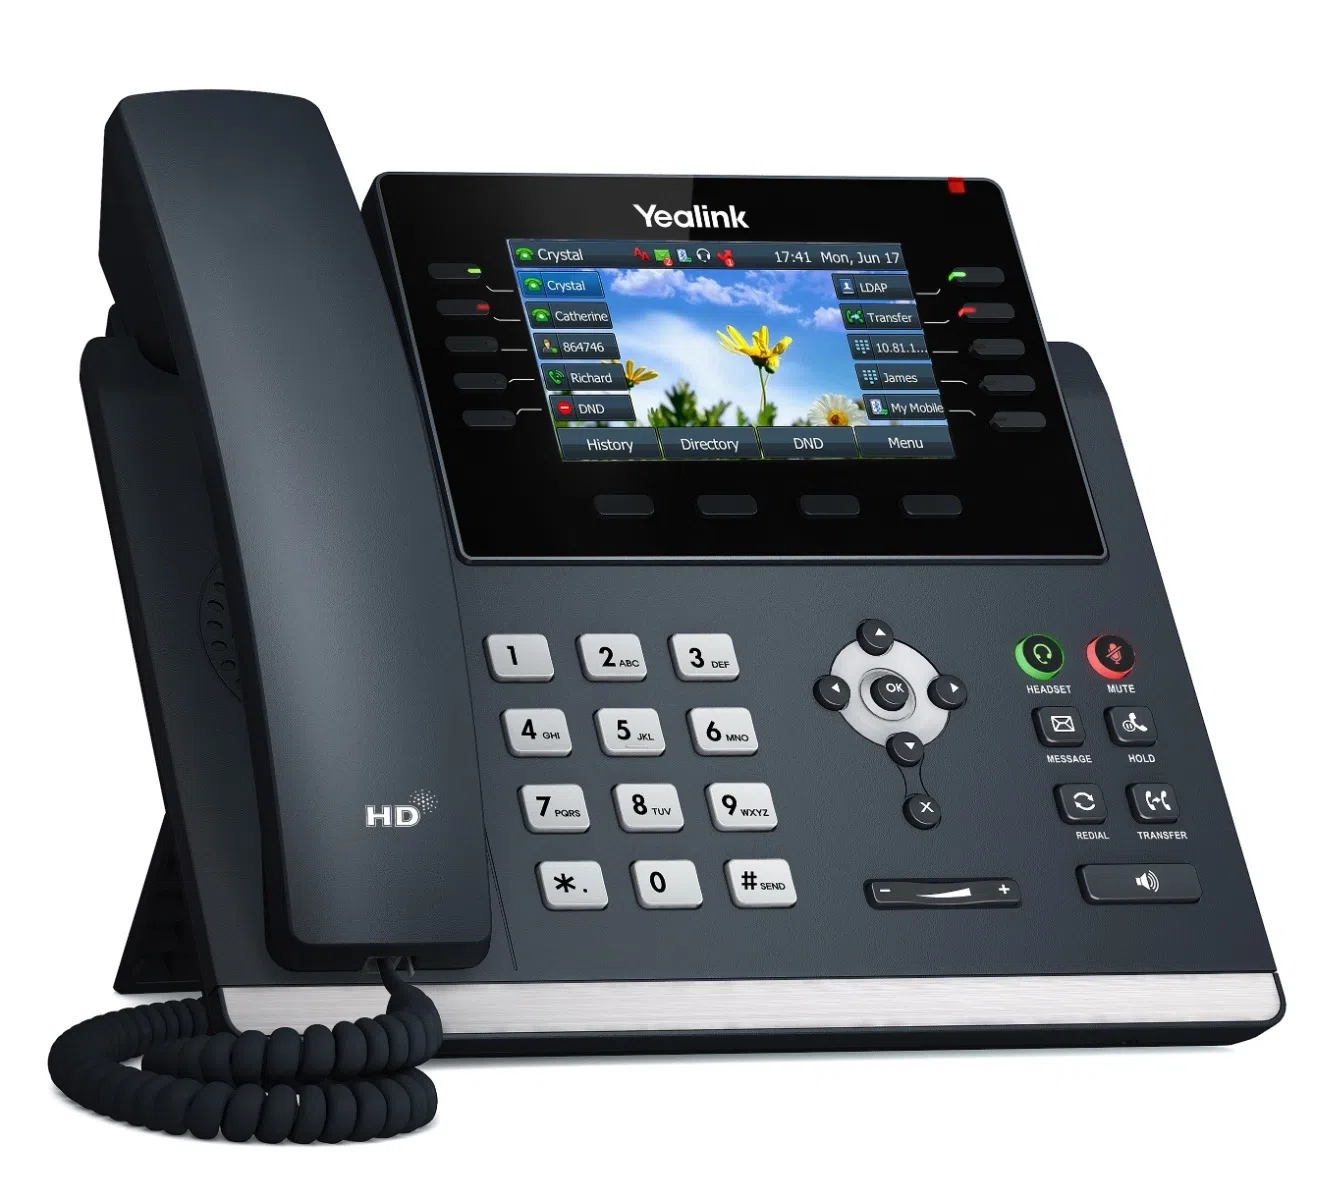 How many USB ports does the Yealink SIP-T46U IP phone have?